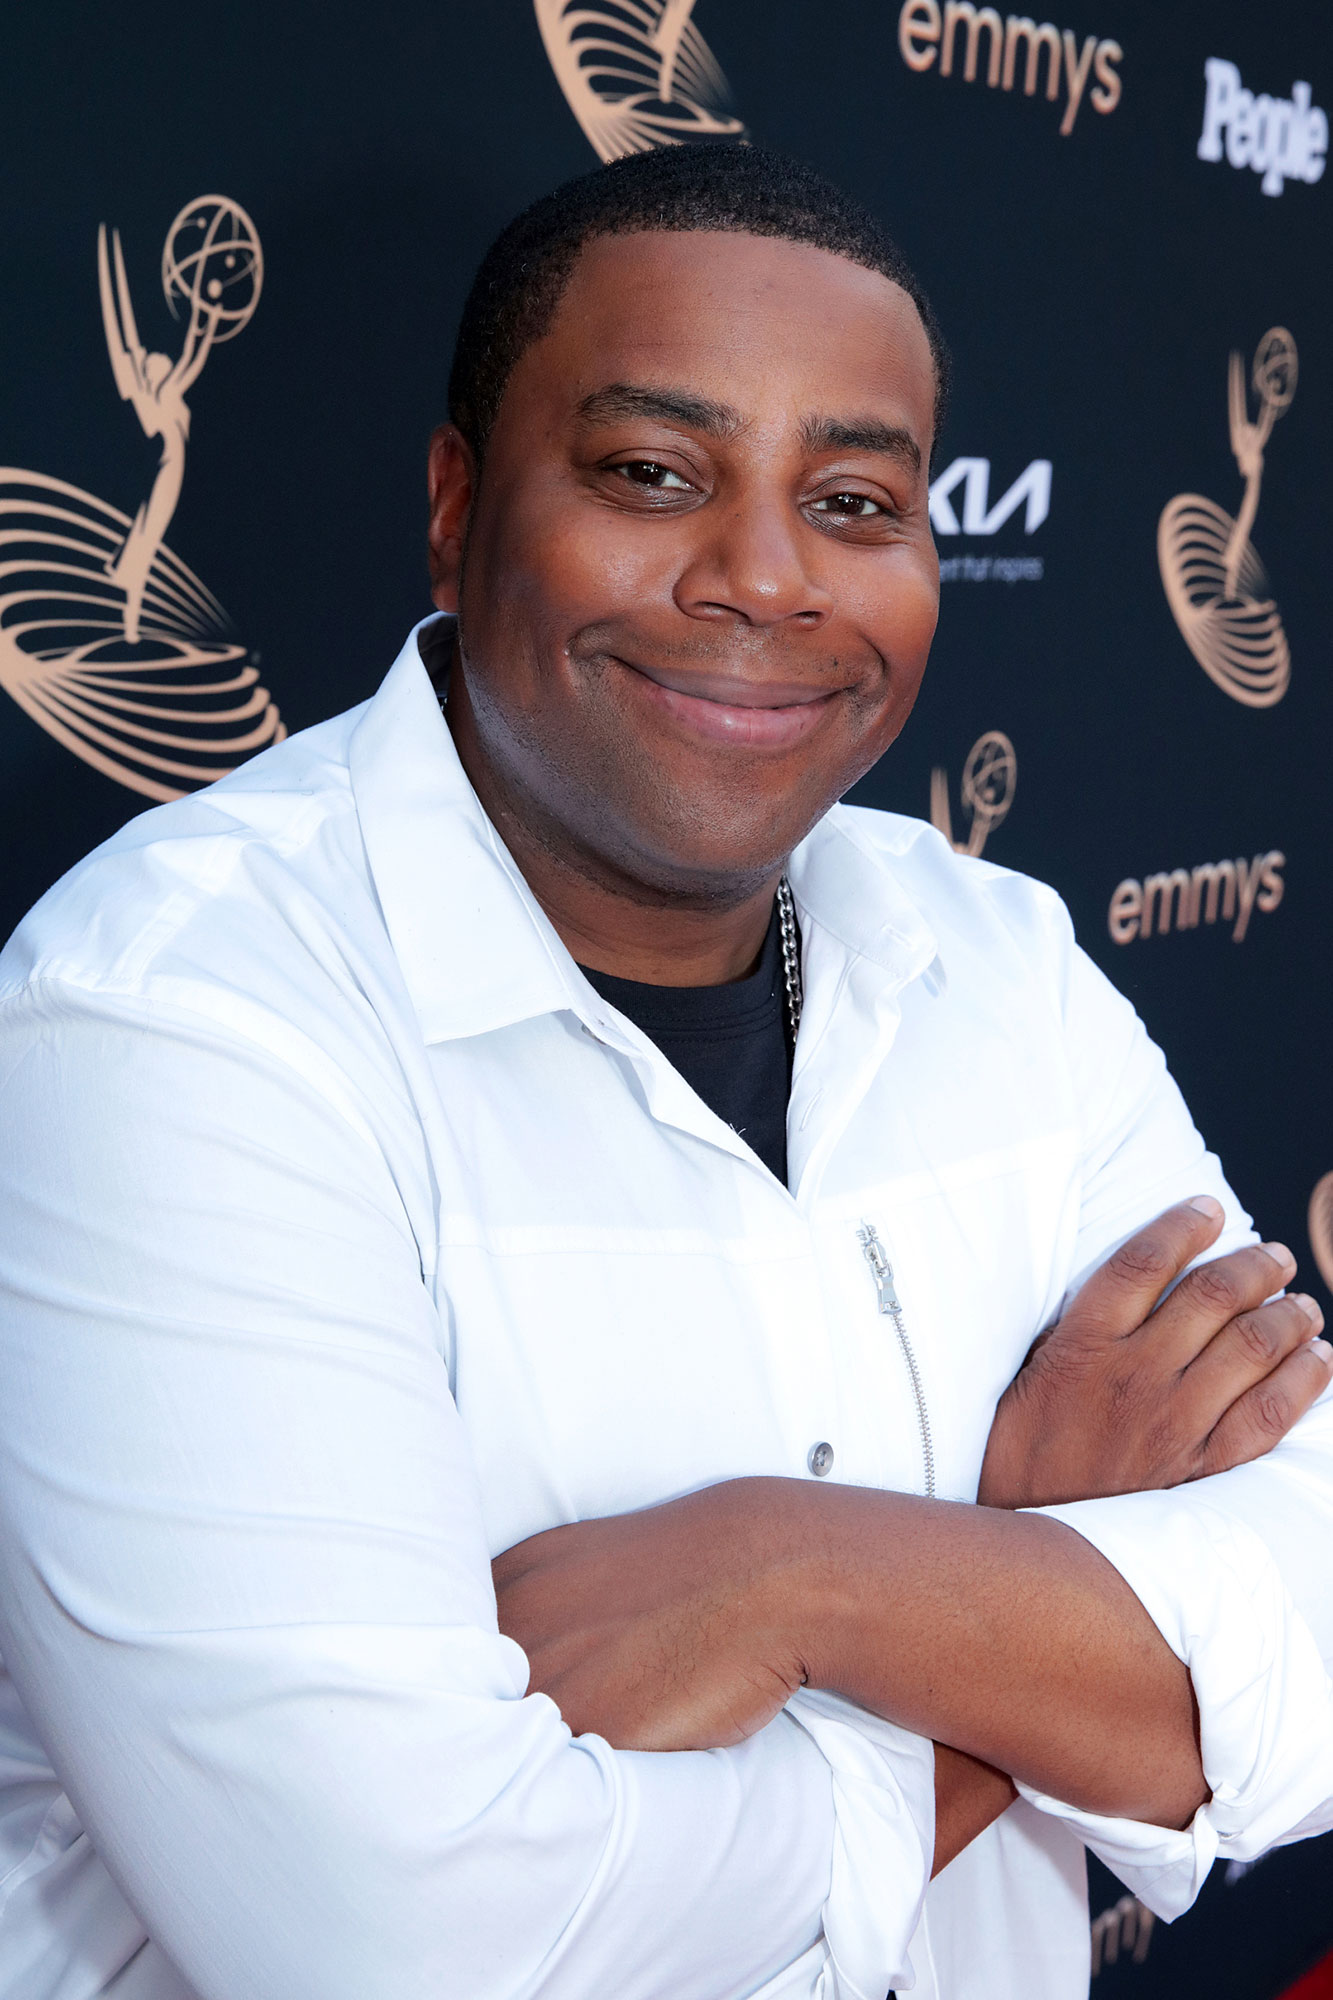 Creating a Good Opening Everything Kenan Thompson Has Said About Hosting the Emmys